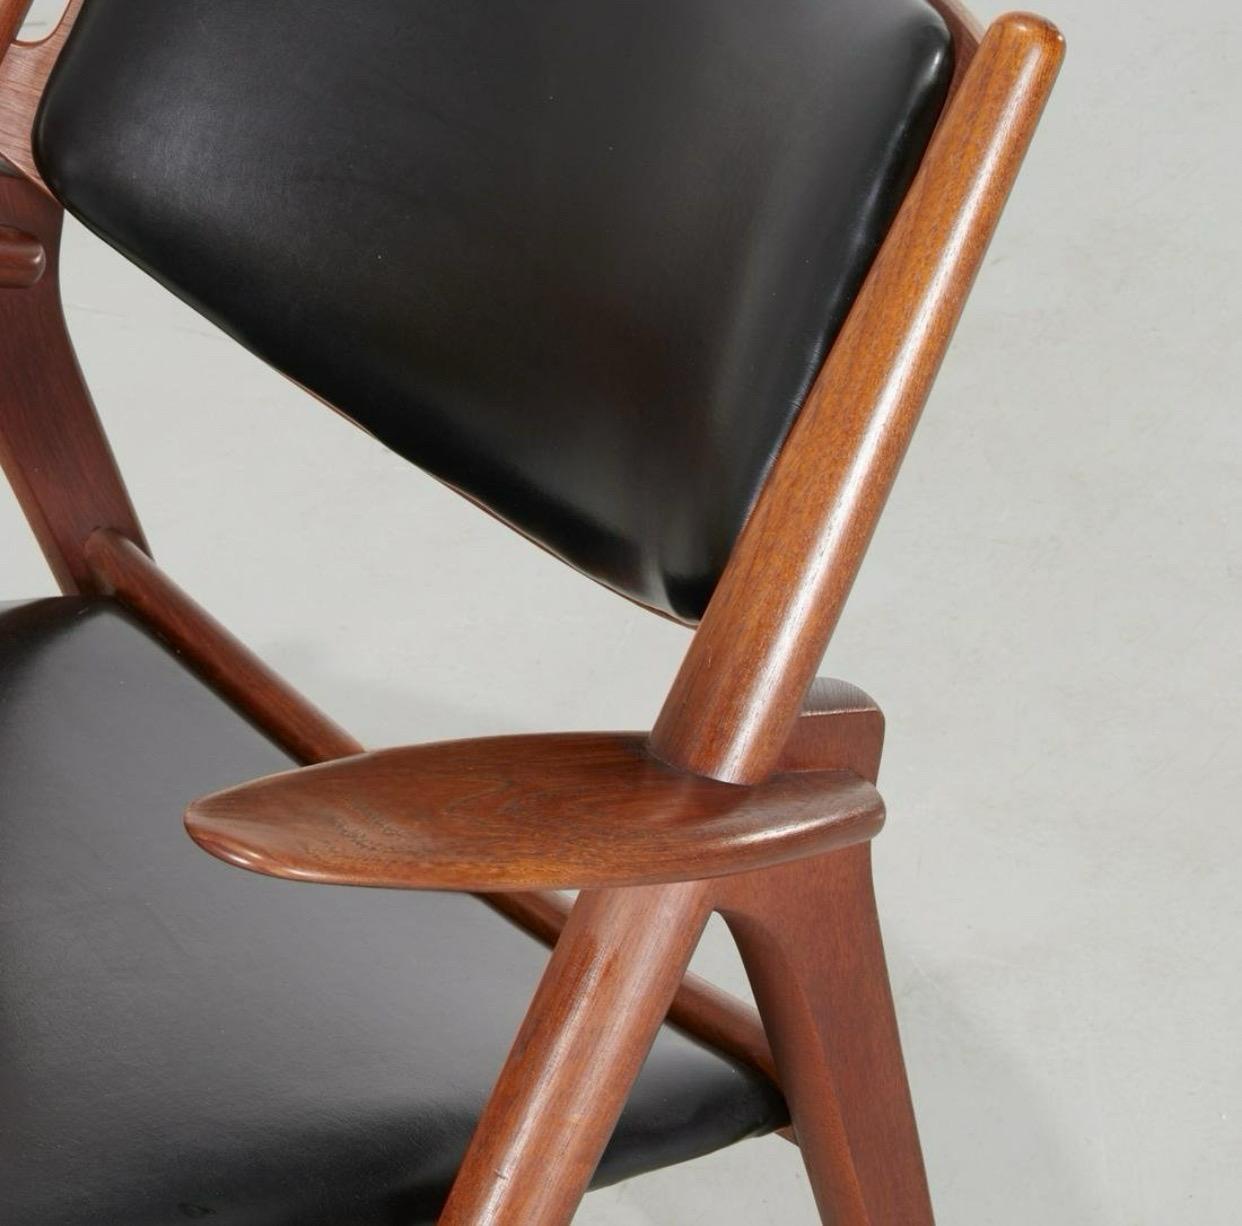 This is a “Sawbuck” chair design by Hans Wegner and hand built  by the Carl Hansen and Son funiture manufacturers in Denmark. Frame consists of solid walnut wood in a modified X shape of the arms and legs. The seat and back are covered in an elegant